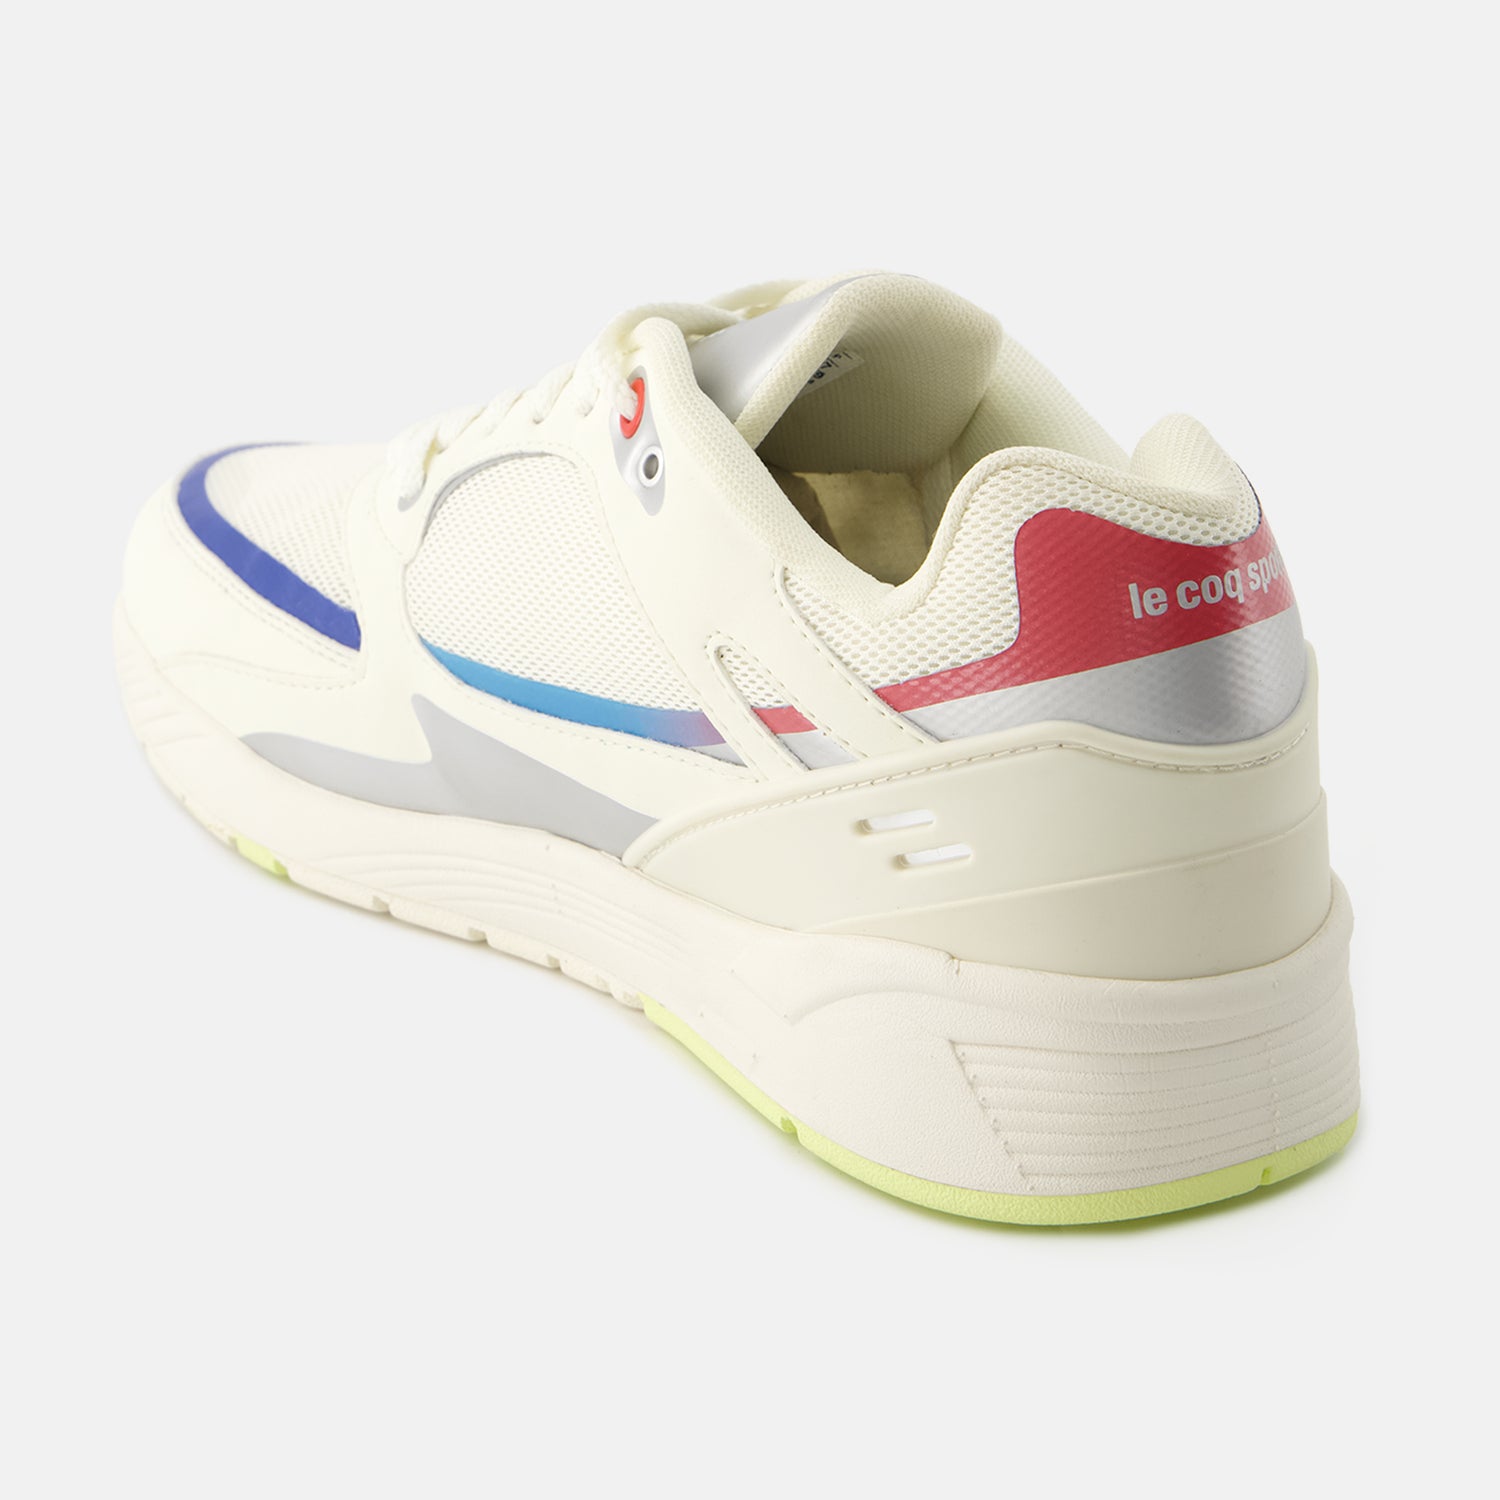 2410369-EFR OLY R1100_2 marshmallow/bbr | Chaussures R1100_2 Equipe de France Unisexe